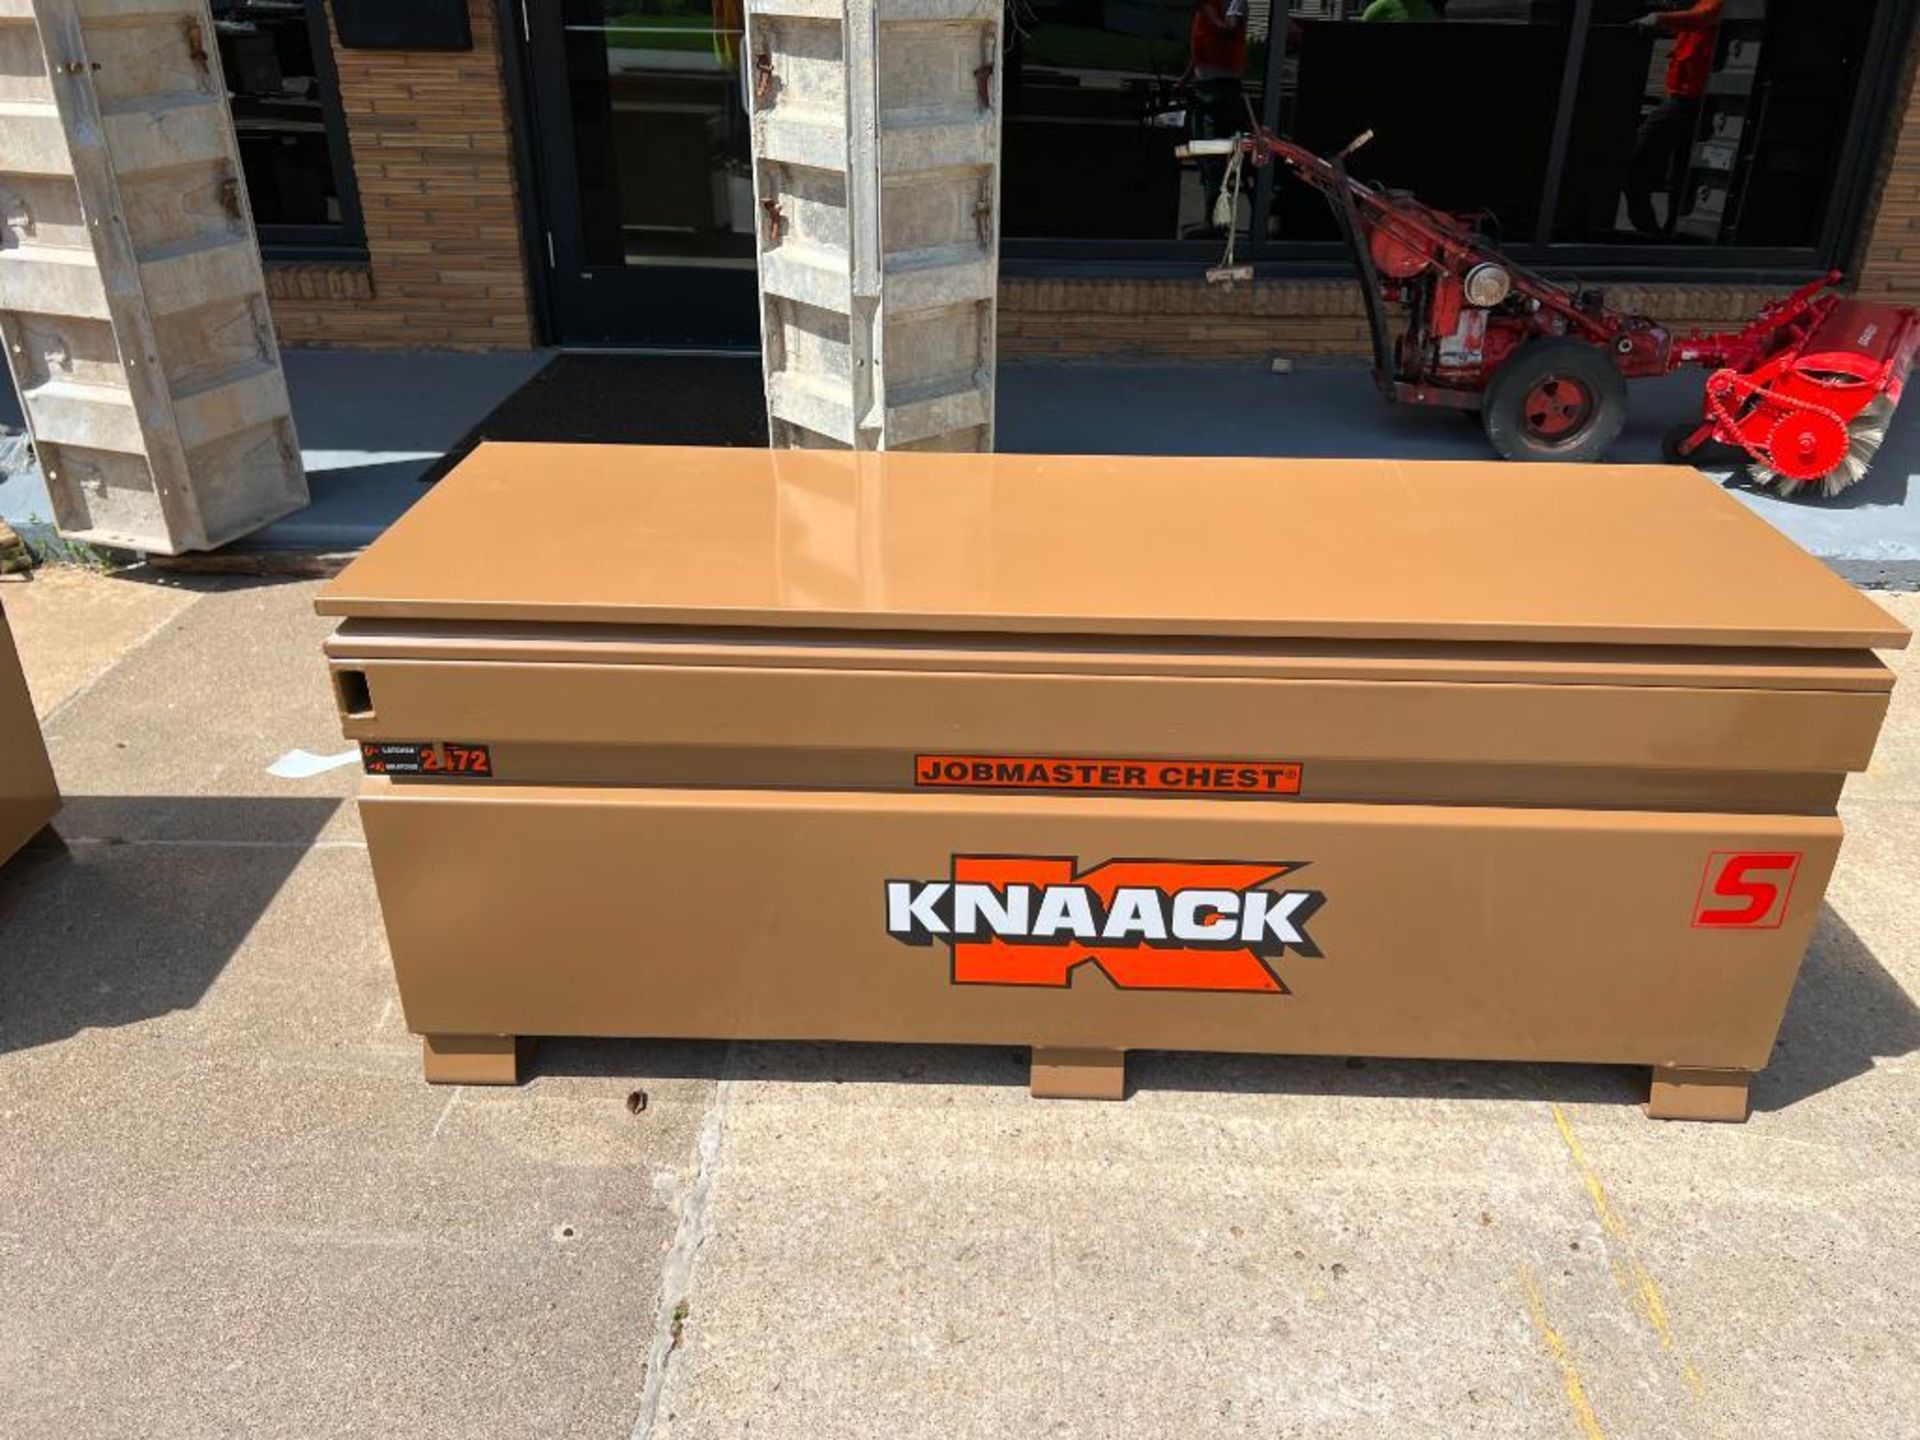 Knaack Jobmaster Chest, Model #2472, Serial #2210917034. Located in Mt. Pleasant, IA